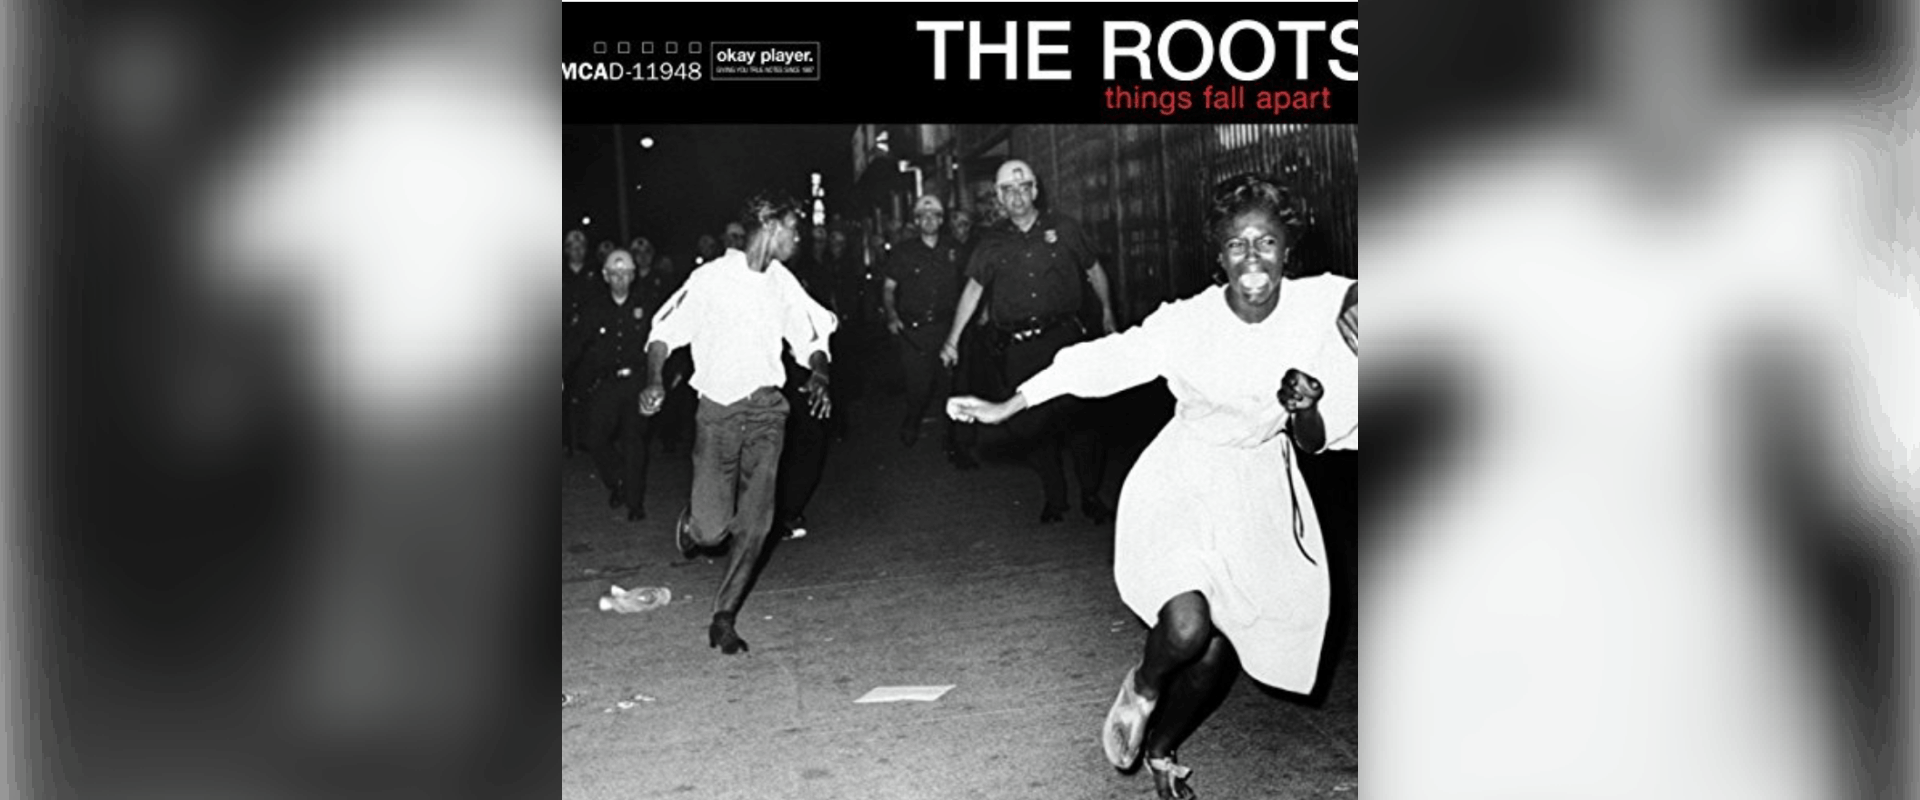 Things Fall Apart' By The Roots At 25